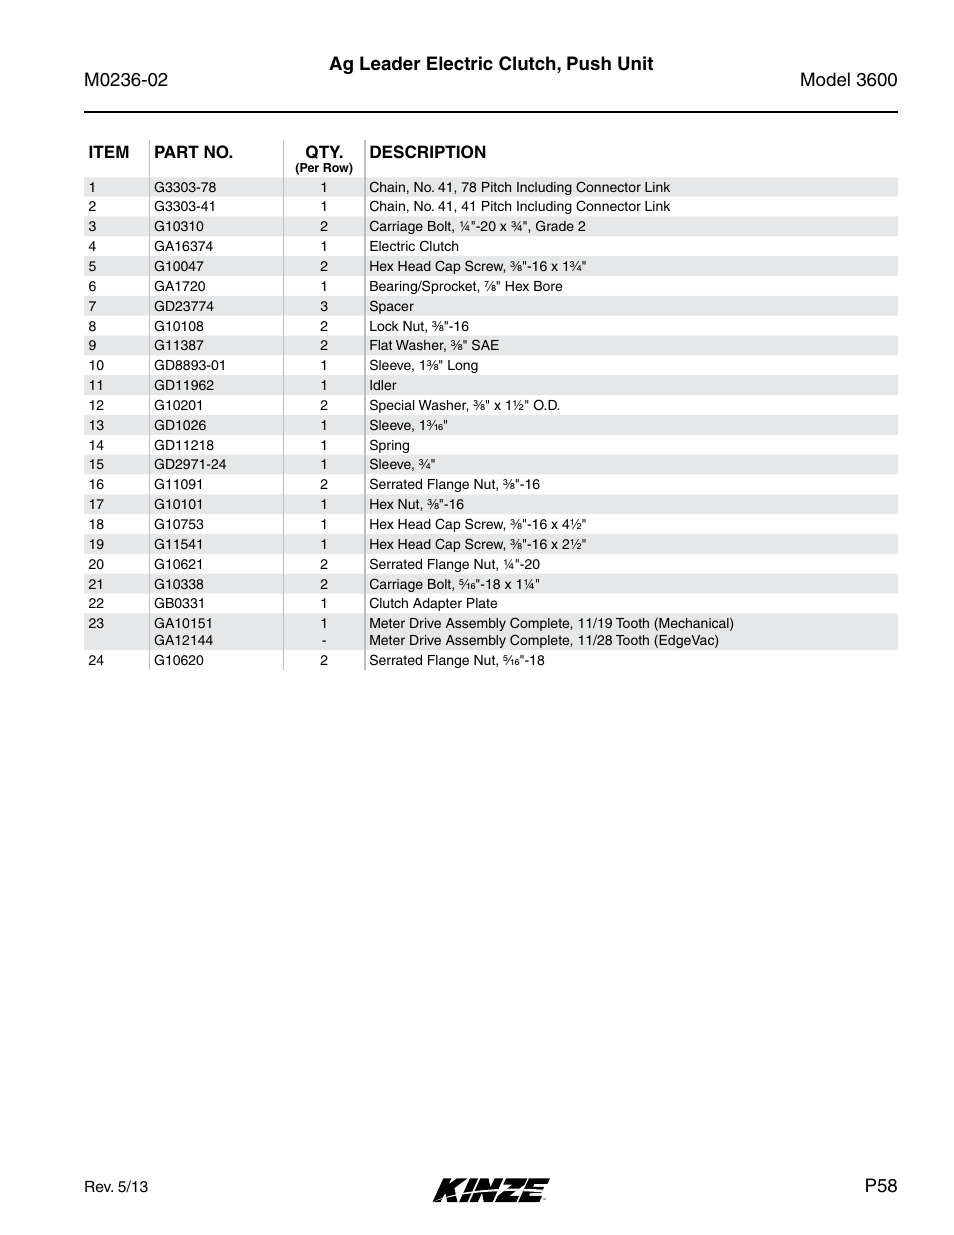 Kinze 3600 Lift and Rotate Planter Rev. 5/14 User Manual | Page 61 / 302